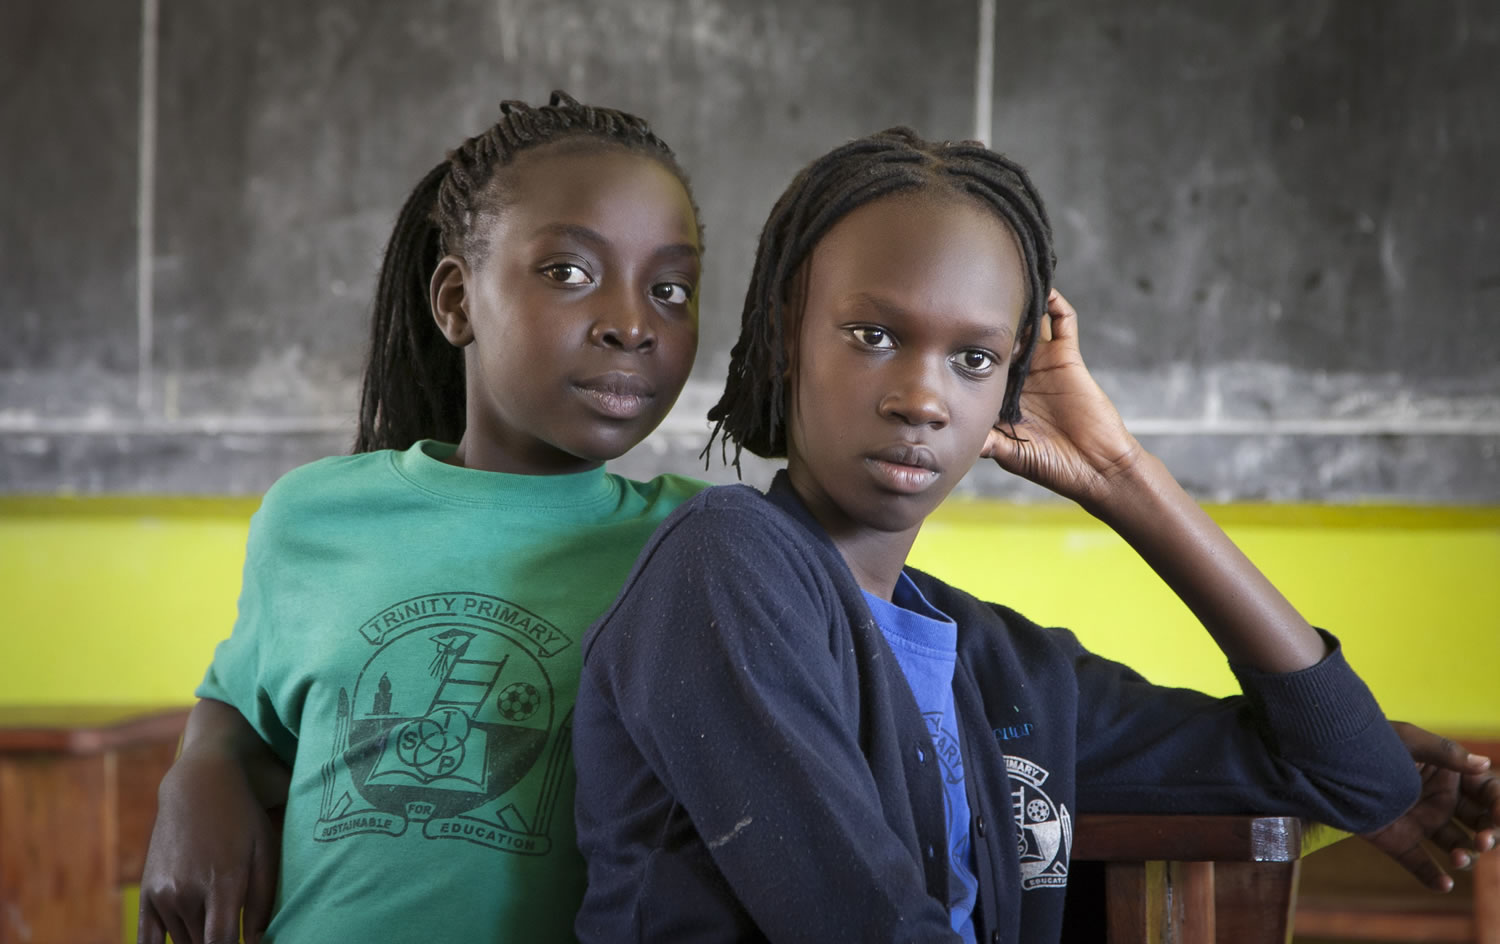 Two South Sudanese teenagers, who previously lived in Israel, listen to their friends reminisce about their time in Tel Aviv&gt; They now live at the Trinity boarding school in Kampala, Uganda.